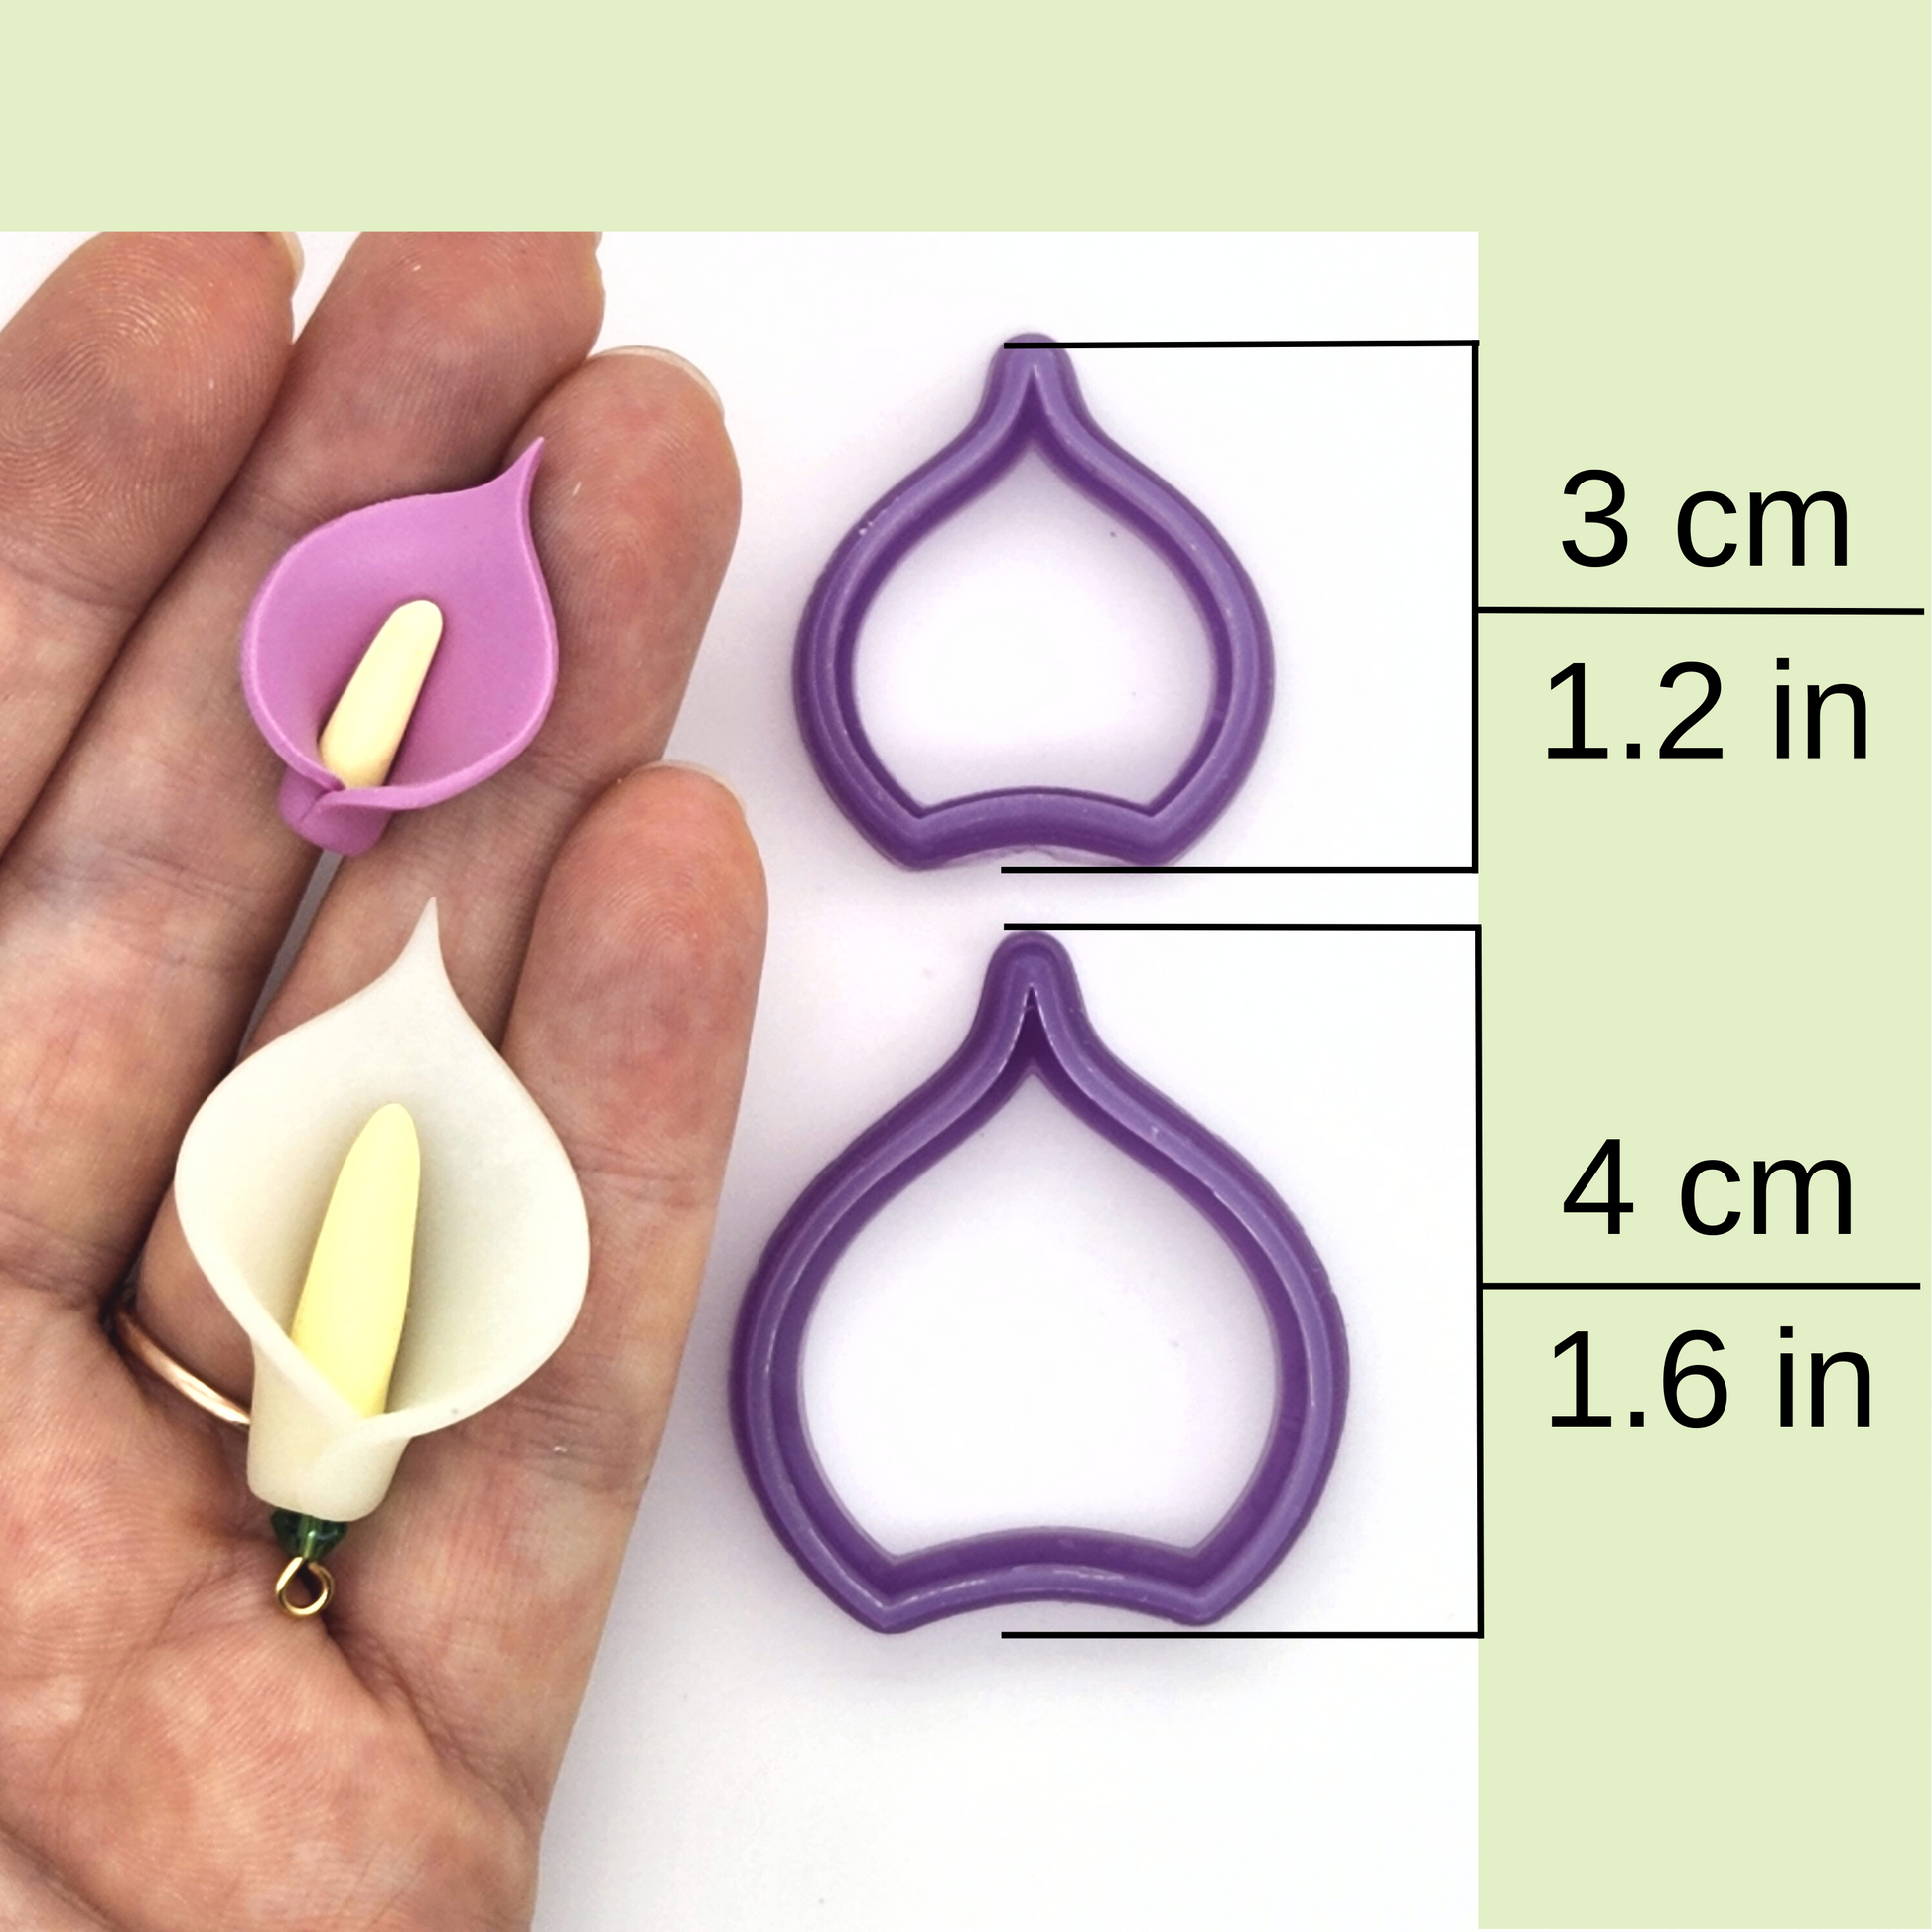 Calla Lily Petal polymer clay cutter sizes 3 cm / 1.2 inch, and 4 cm / 1.6 inch, alongside their sample finish products